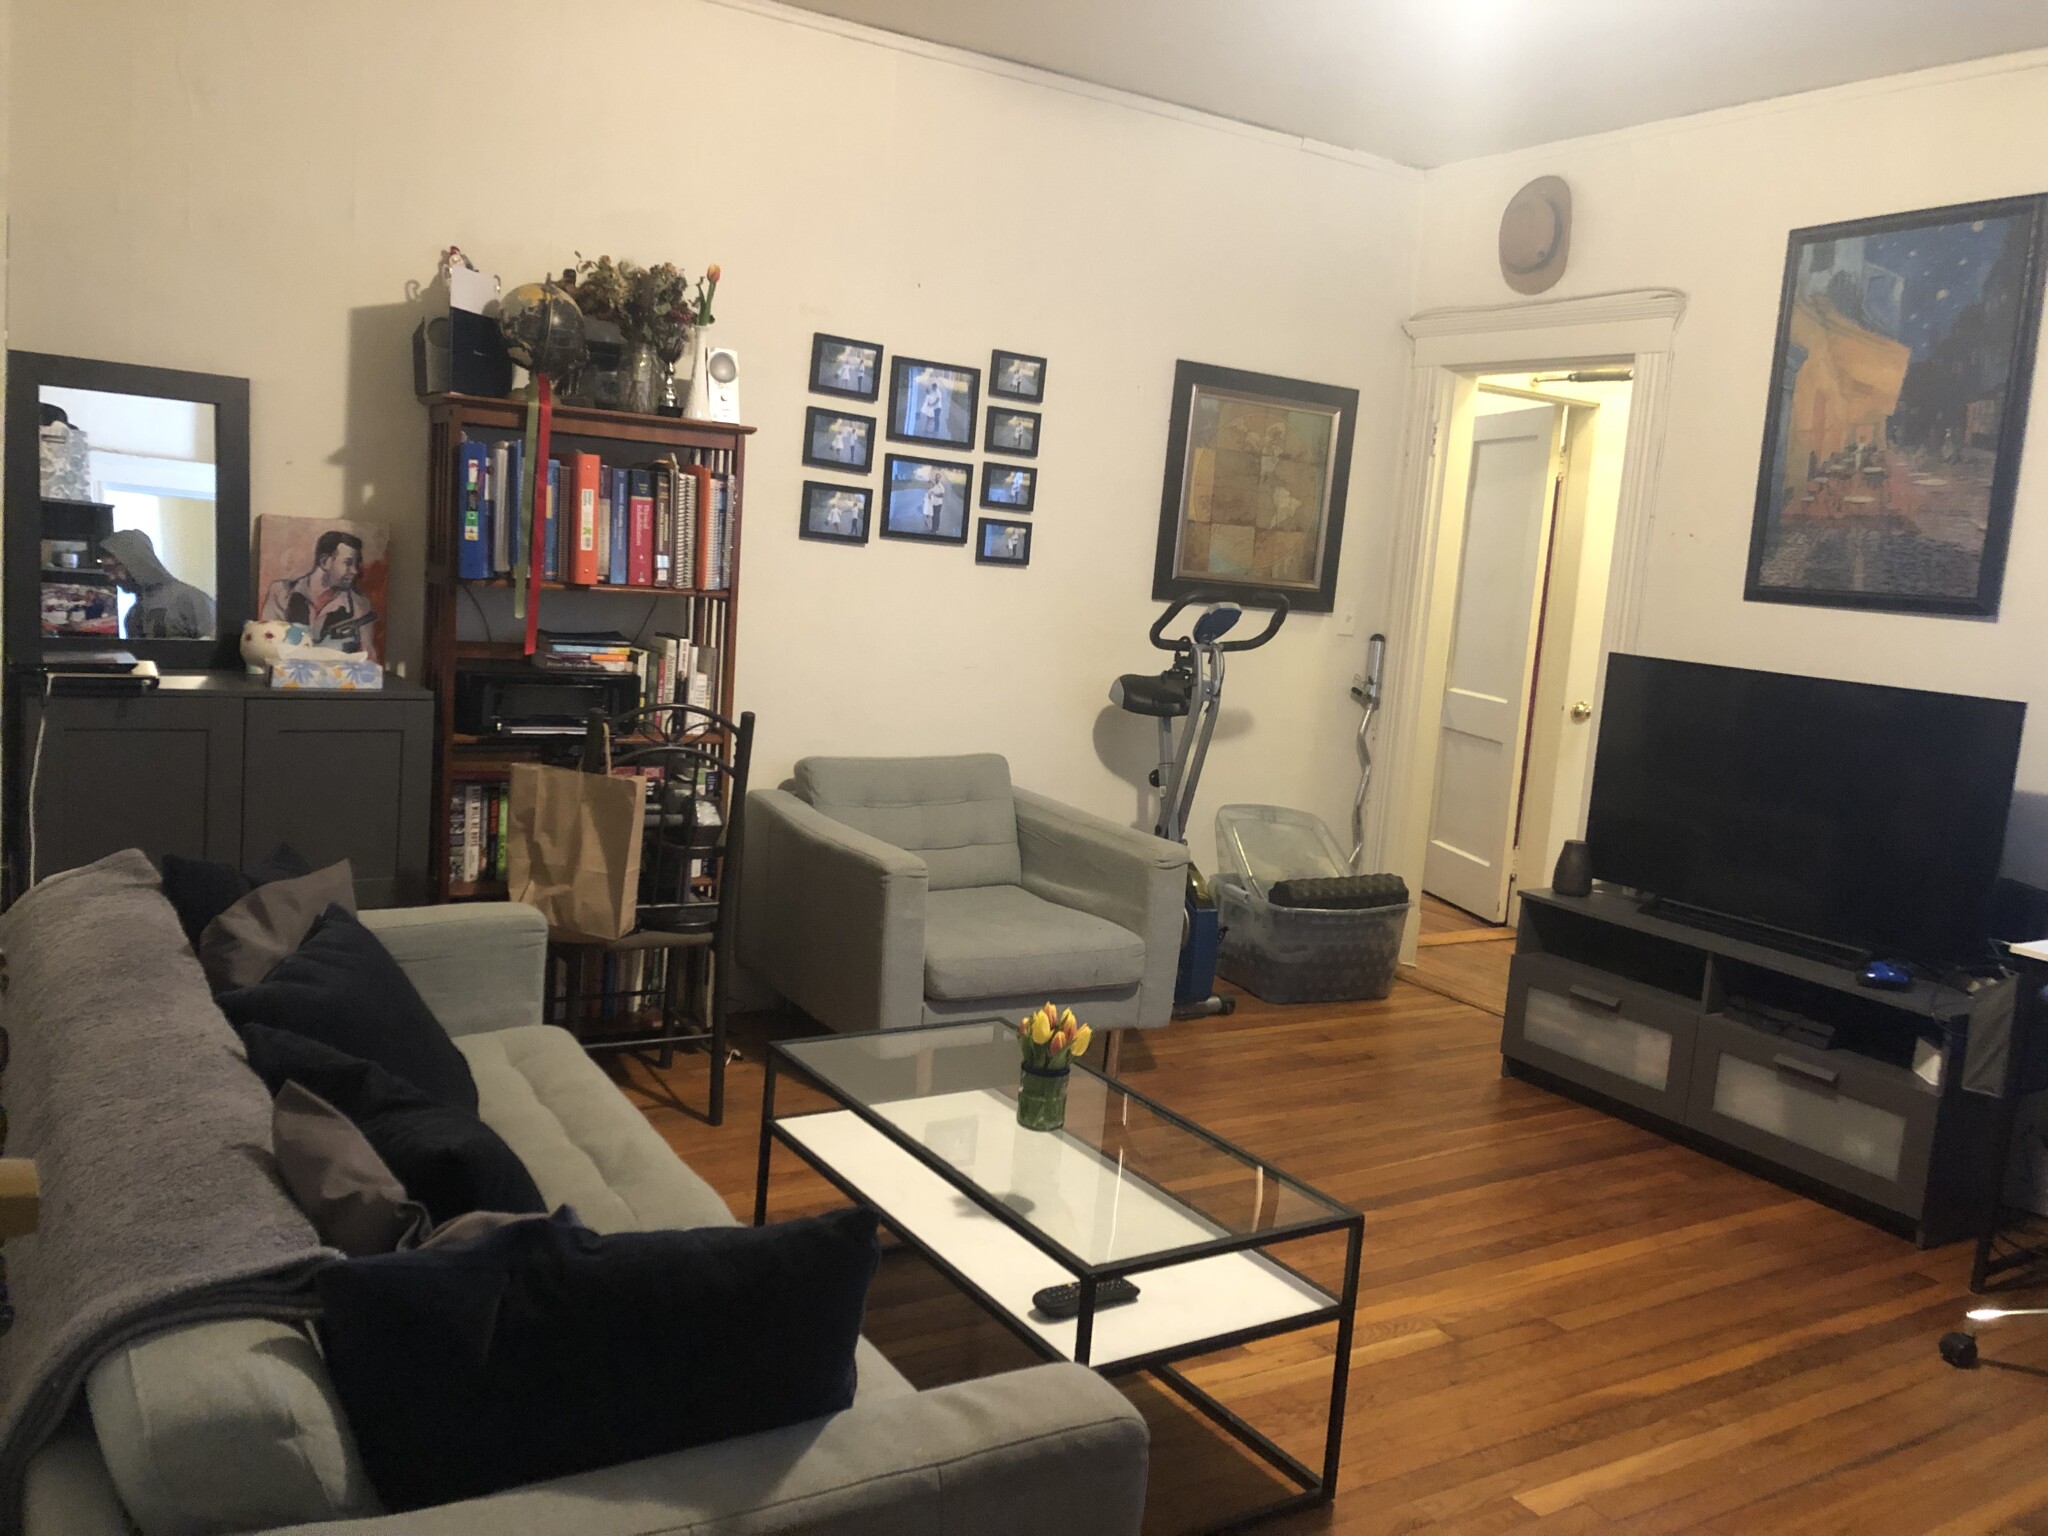 Photos of apartment on Jersey St.,Boston MA 02215